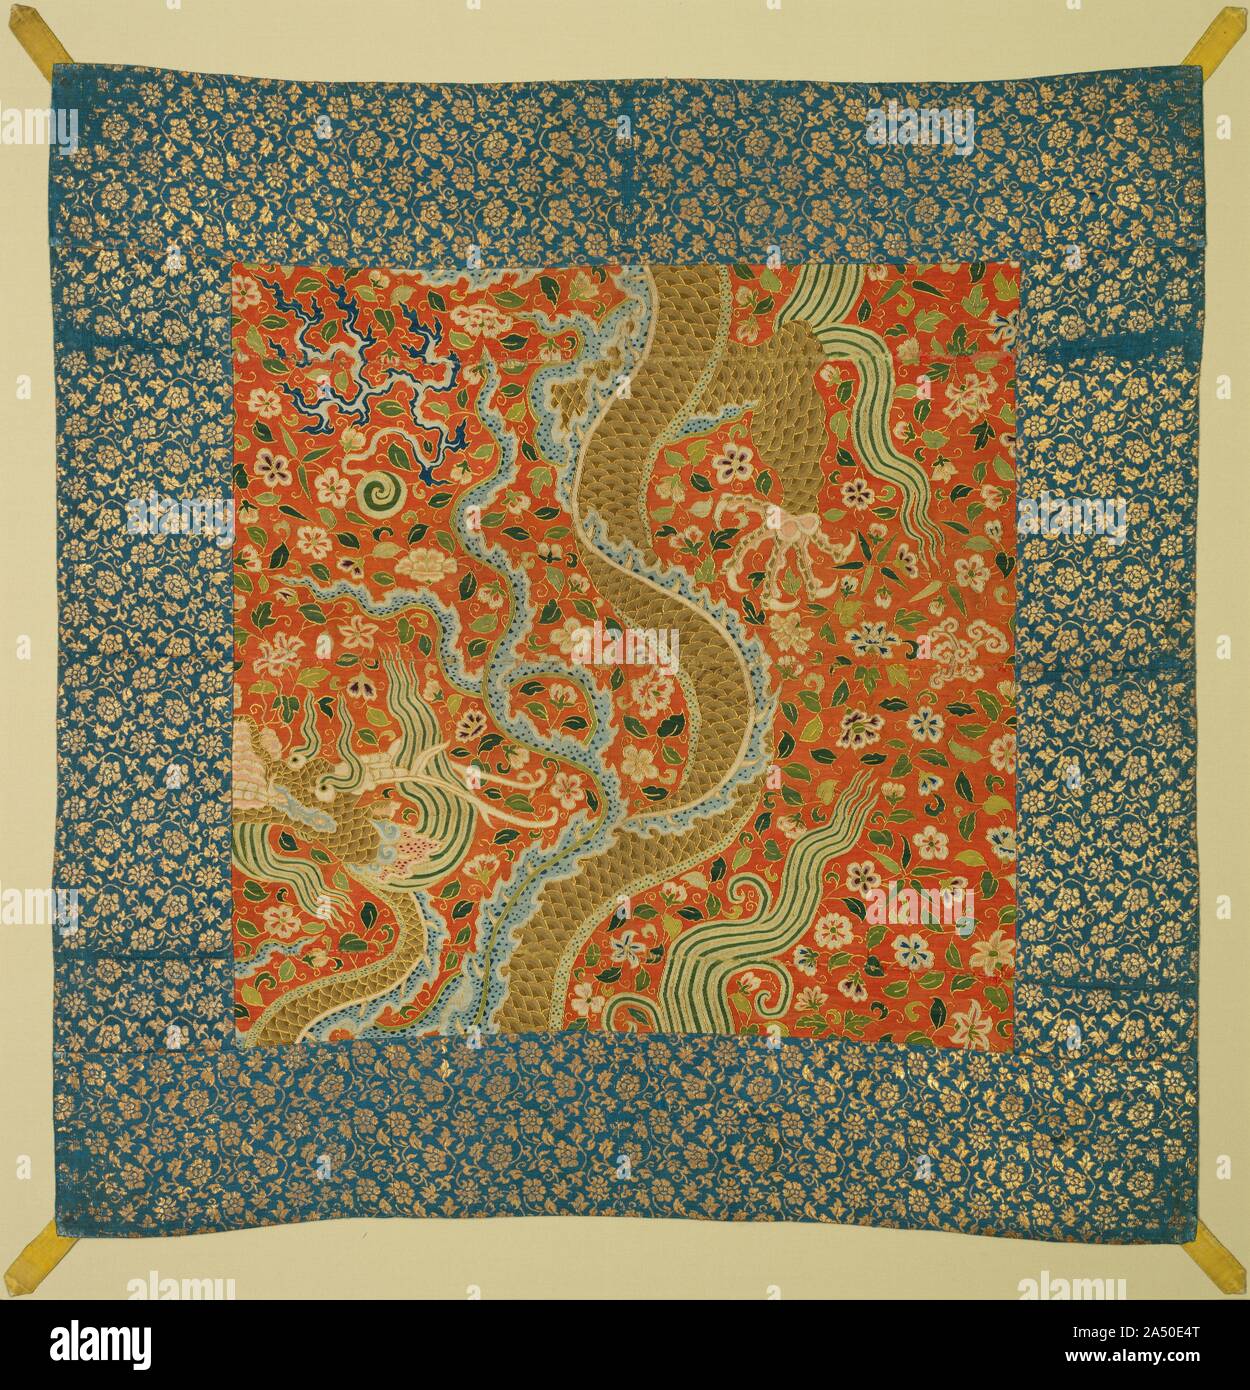 Canopy with Dragon Among Flowers, late 1100s. This rare silk tapestry in the center, from the Southern Song imperial workshop in Hangzhou, incorporates Central Asian and Chinese influence. The golden dragon on a ground of flowers is Central Asian, as are the dragon&#x2019;s upturned snout, flaming mane, and antlers. The serpent-like treatment of the dragon&#x2019;s body, however, is Chinese in style. The fineness of the silk threads, weaving, and flat gold thread gilded on both sides indicates imperial production. The tapestry was sewn at an unknown time to a later Ming dynasty border with tab Stock Photo